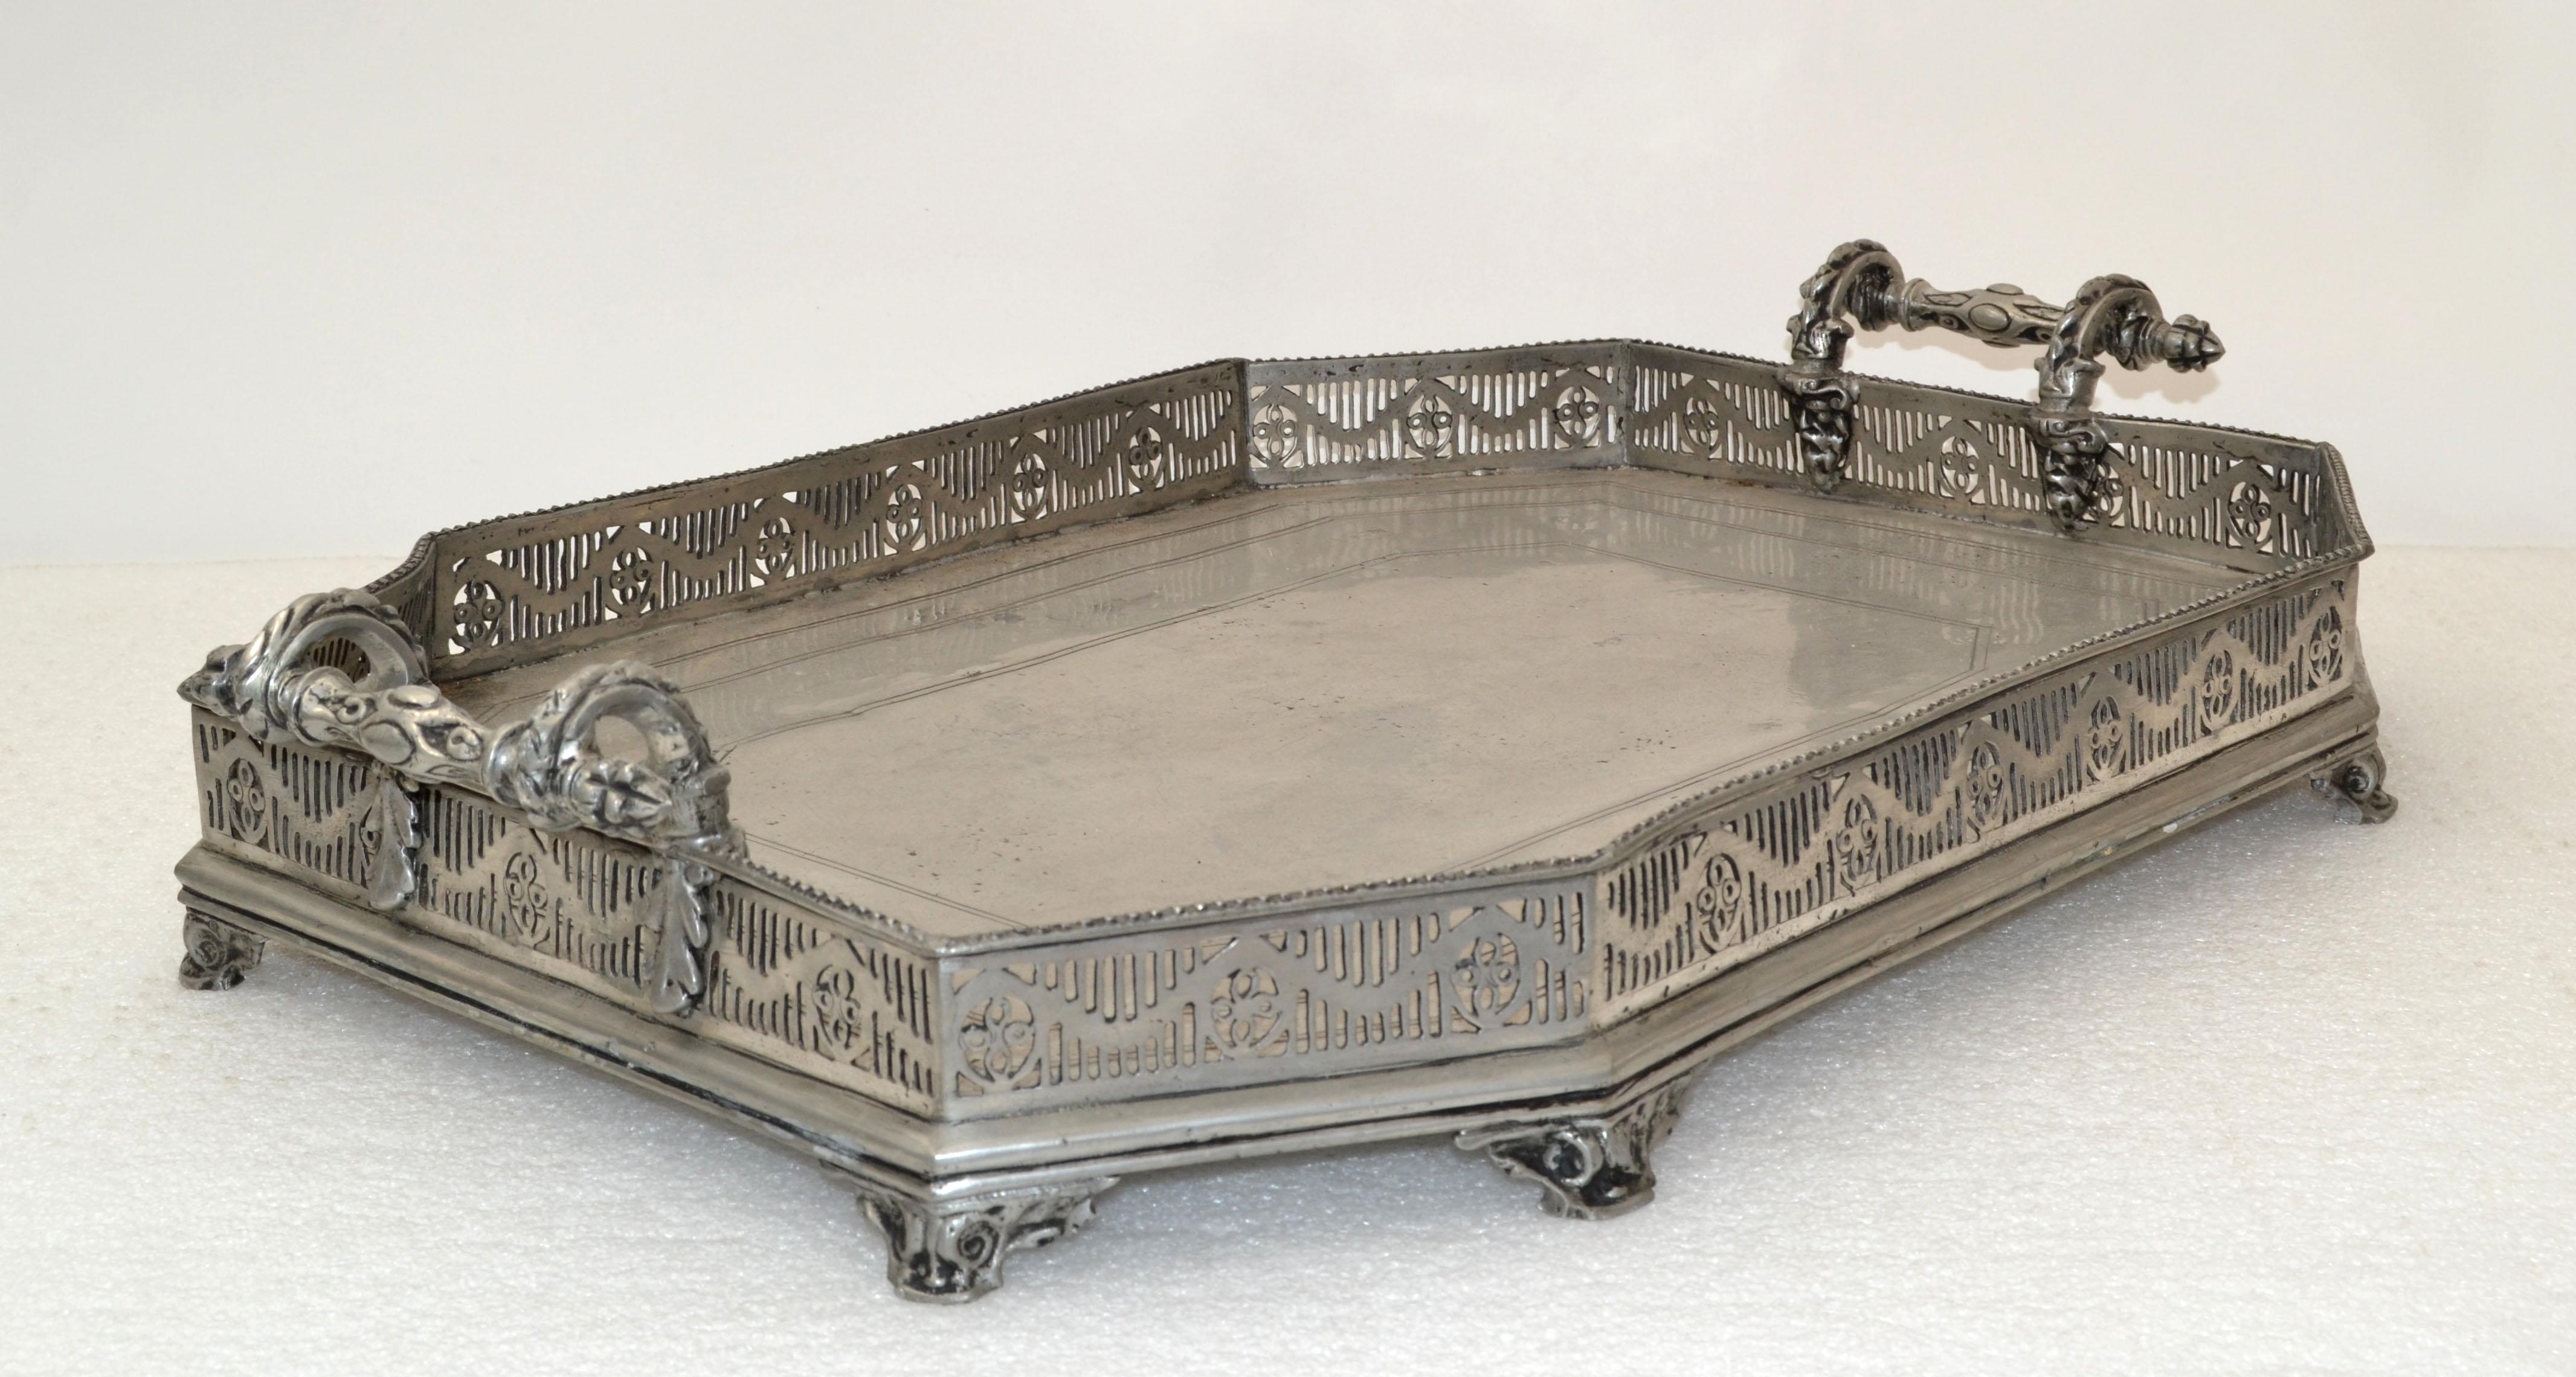 Mexican Spanish Silver Ornate Large Footed Serving Tray with Handles Trademark